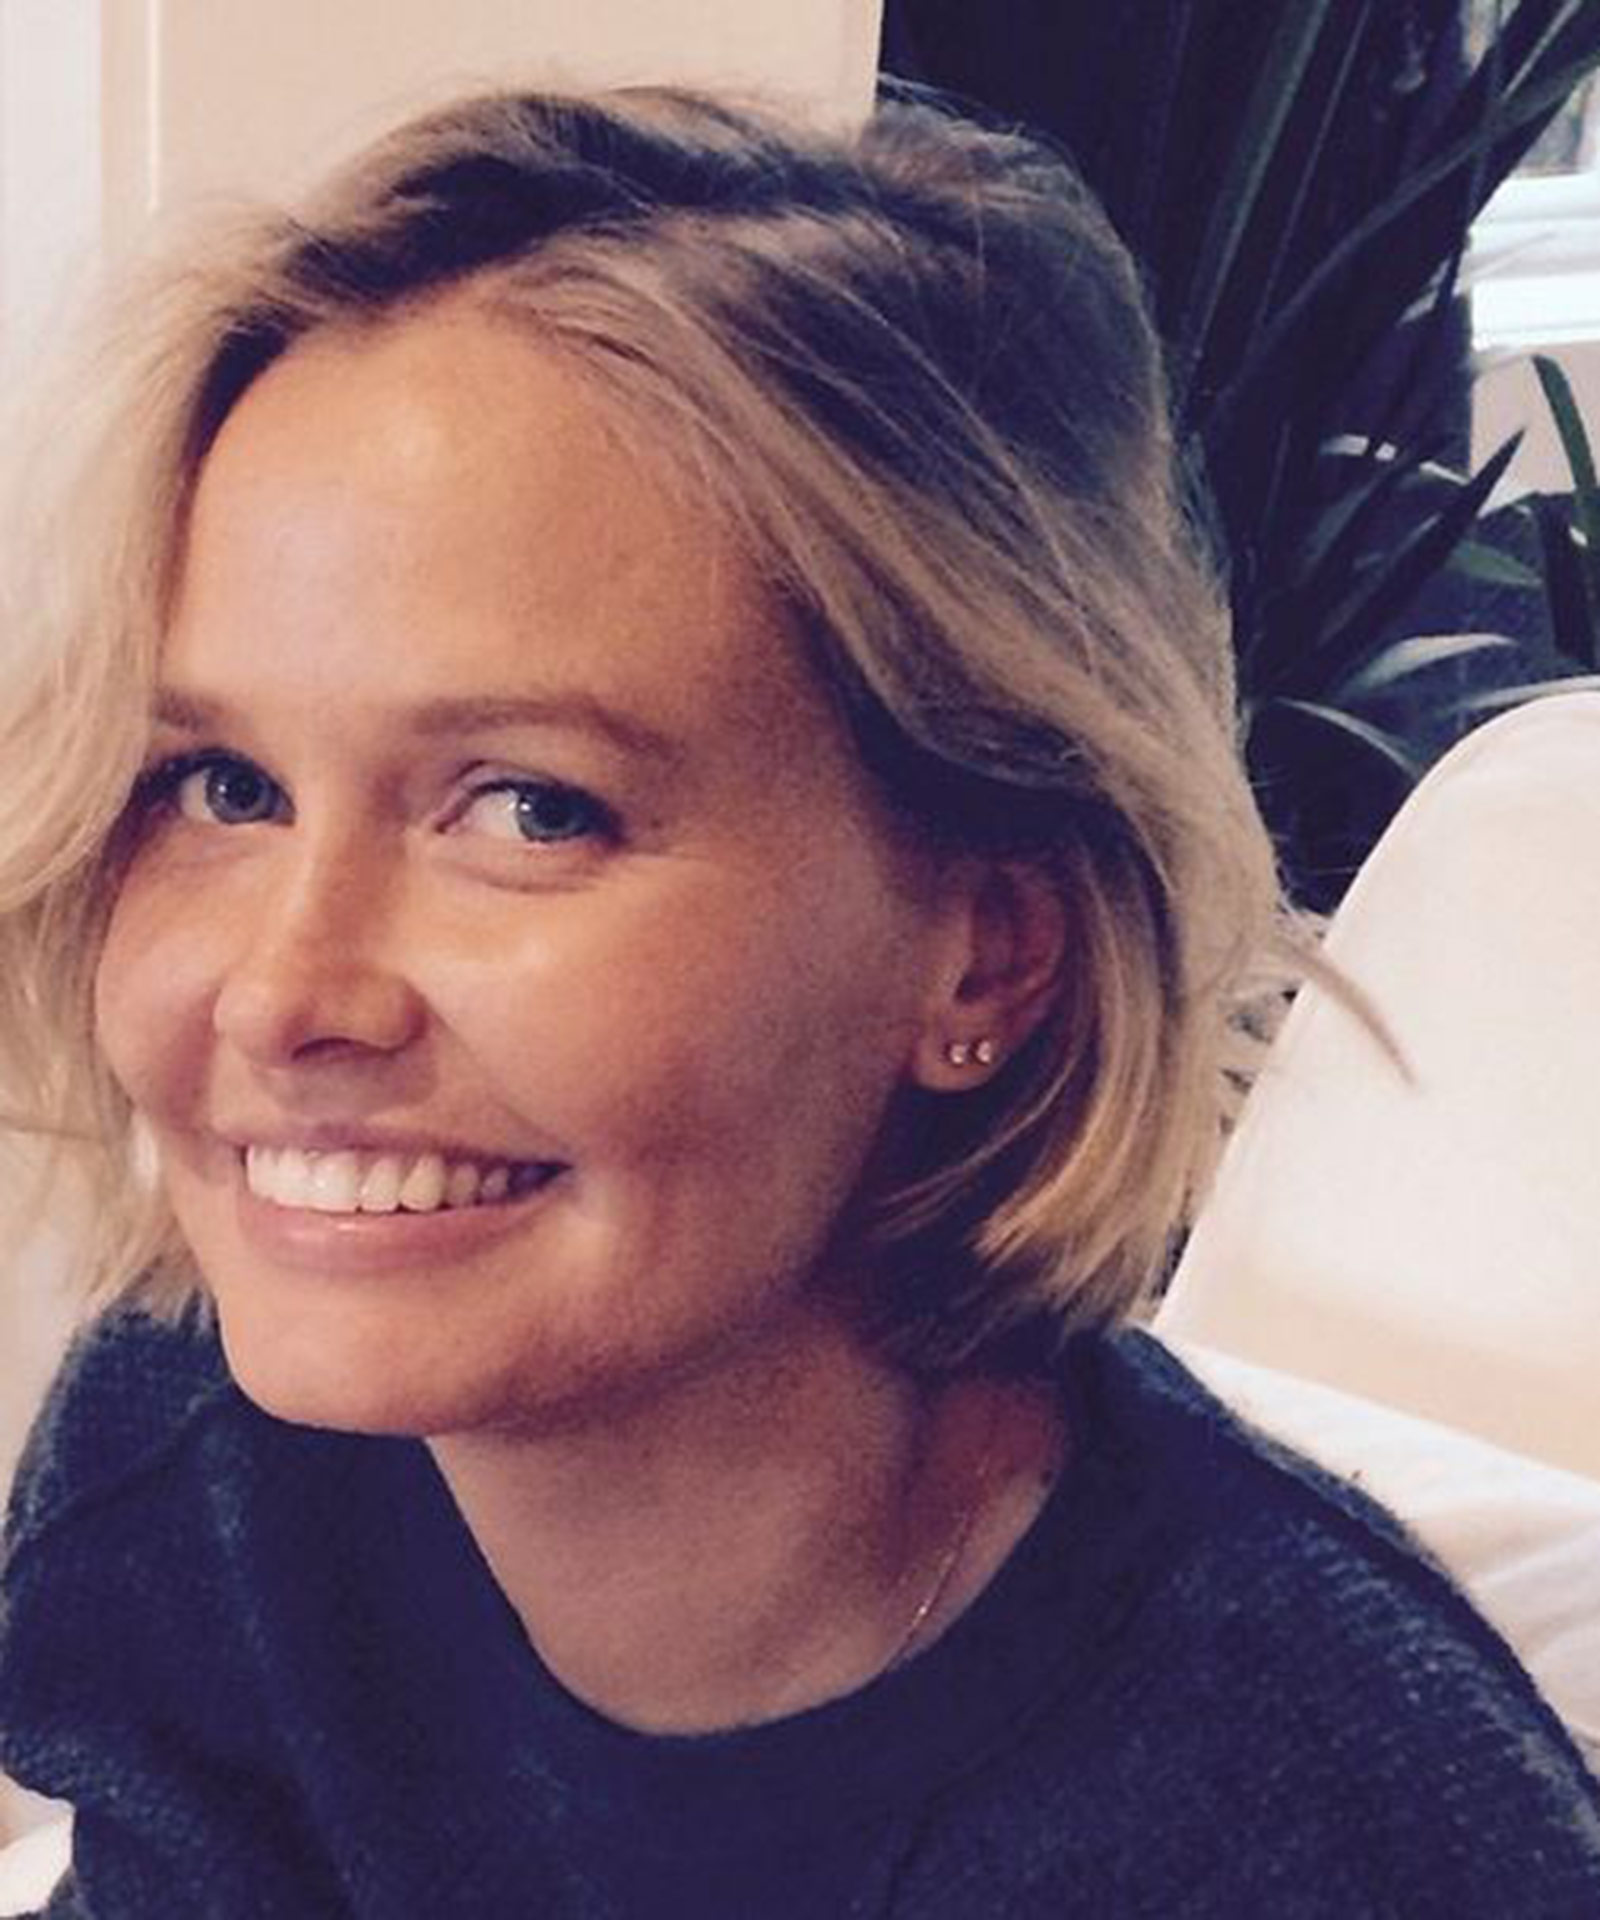 “Missing you already” Lara Bingle’s mum Sharon shares a beautiful make-up free snap of her daughter